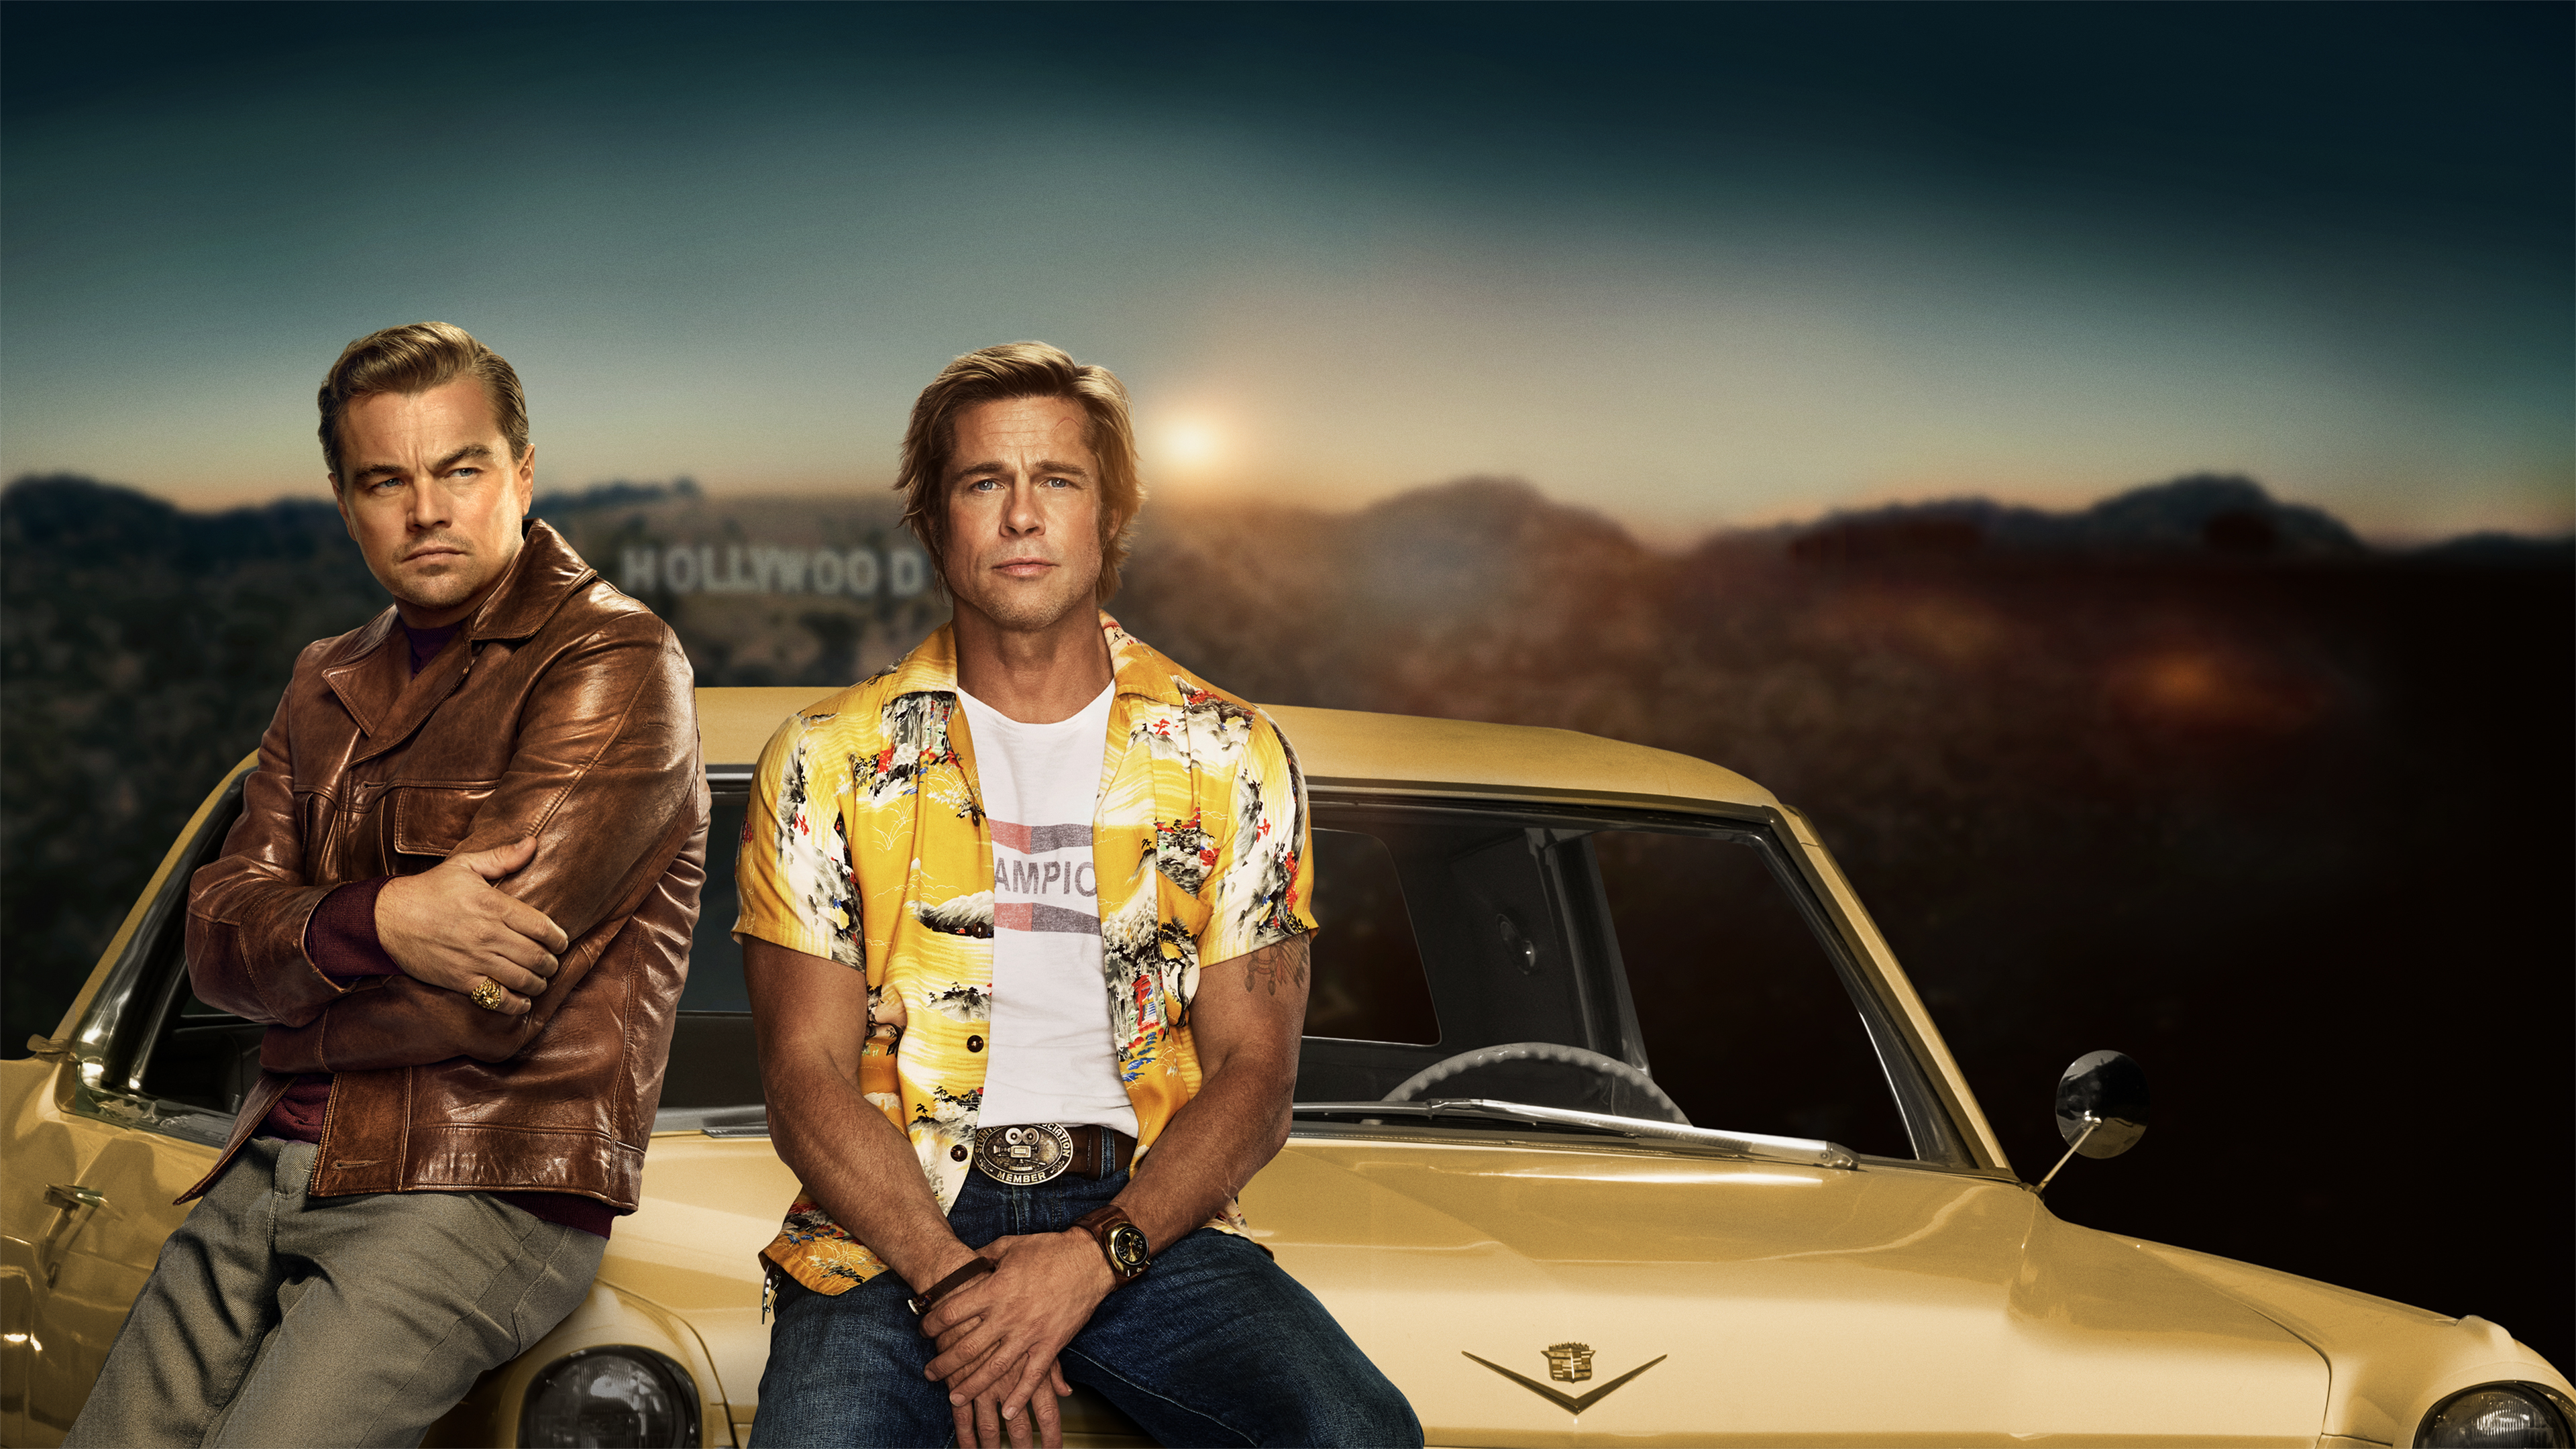 once upon a time in hollywood, movie, brad pitt, leonardo dicaprio